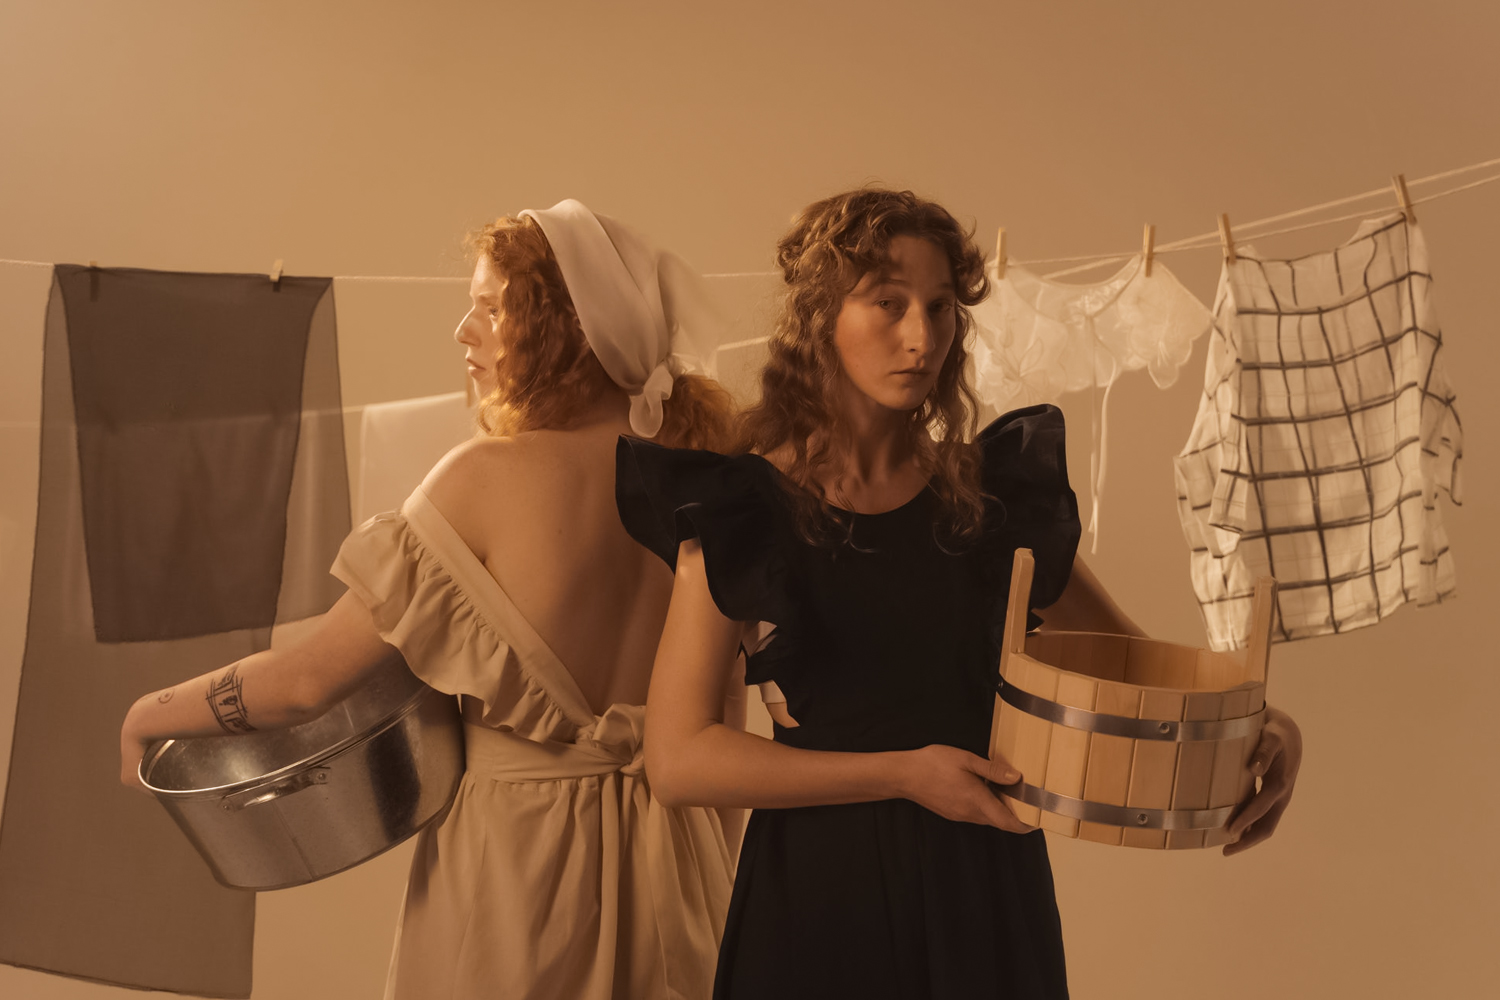 two women in vintage clothing do laundry